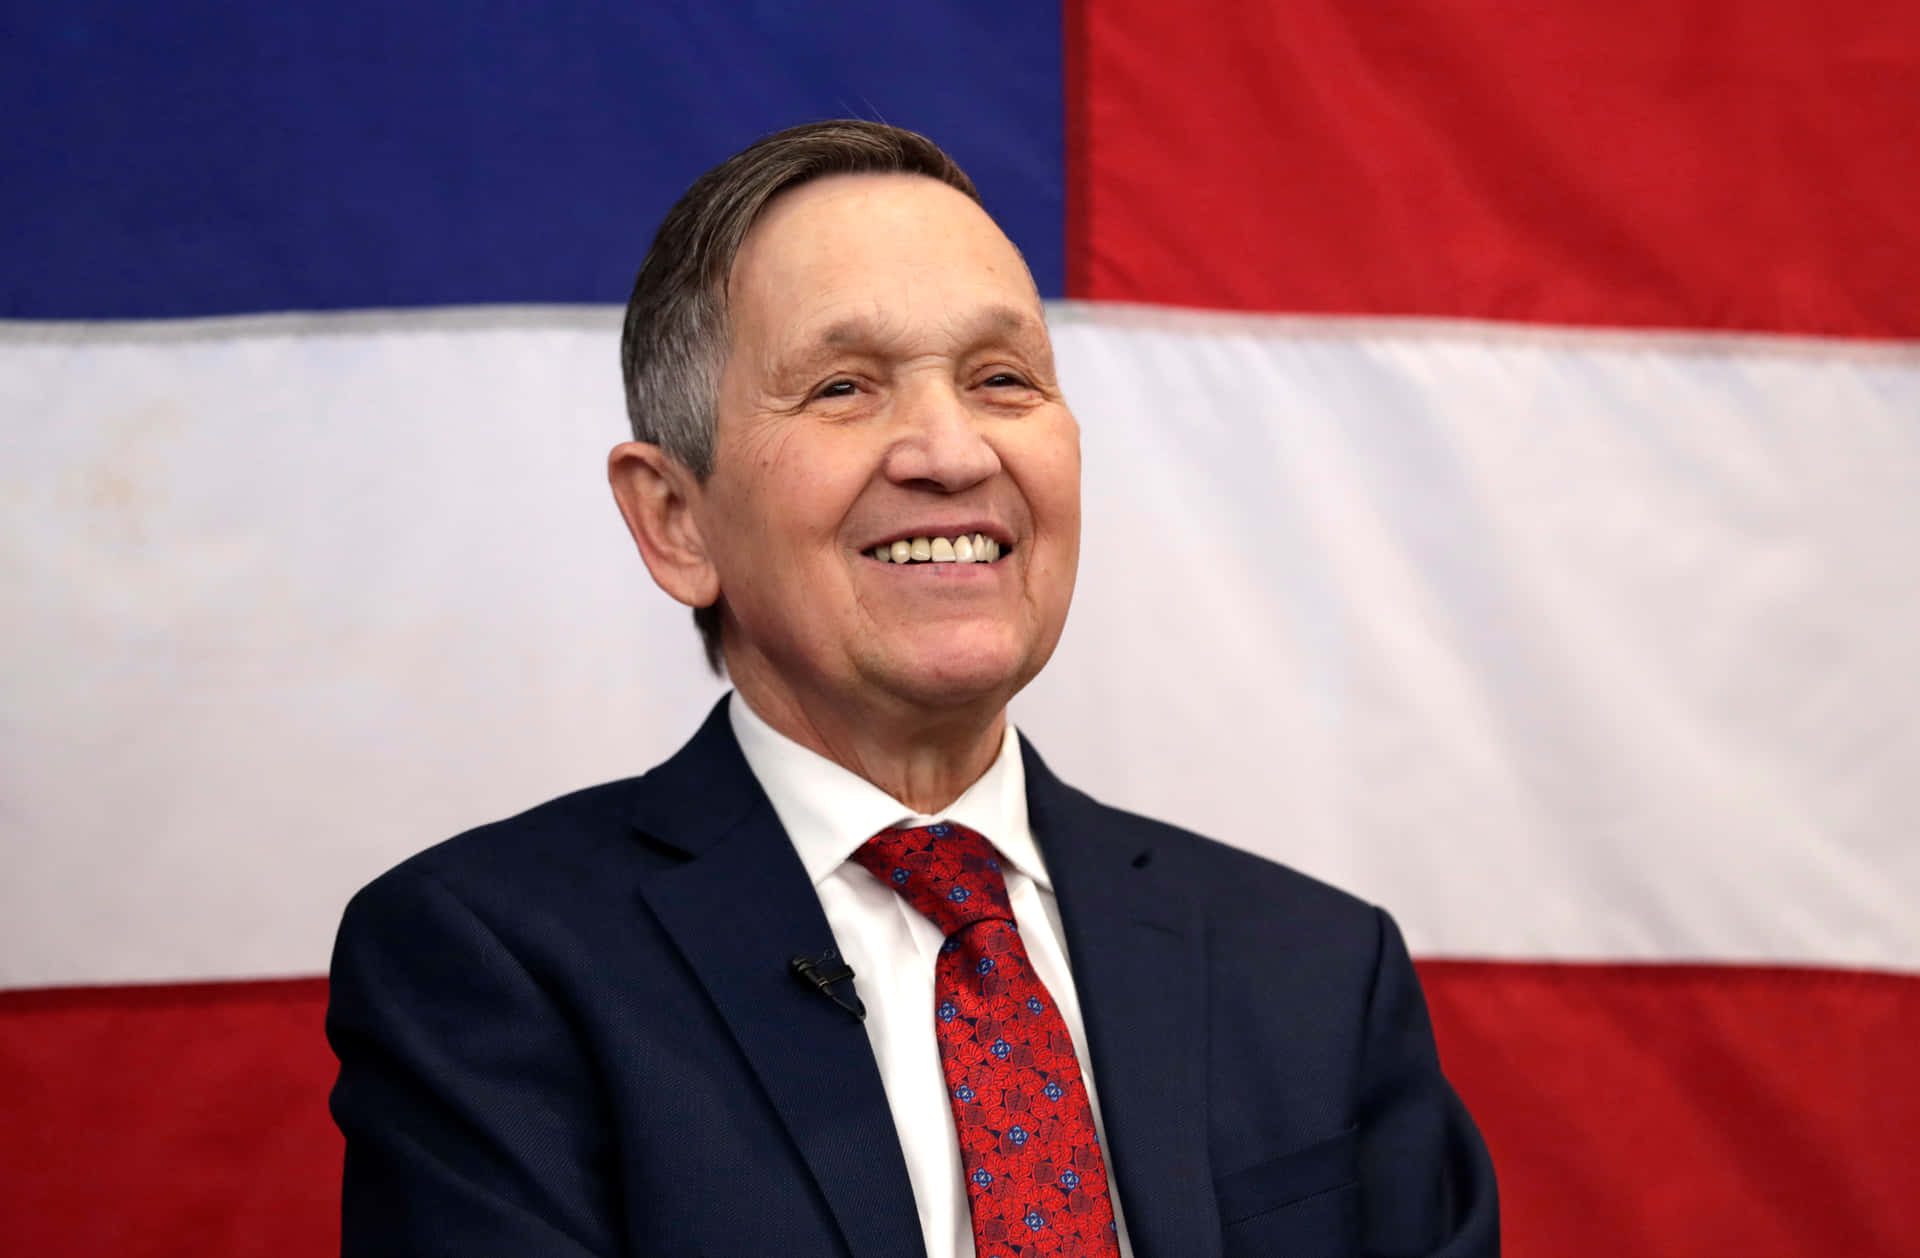 Dennis Kucinich With Adorable Smile Wallpaper